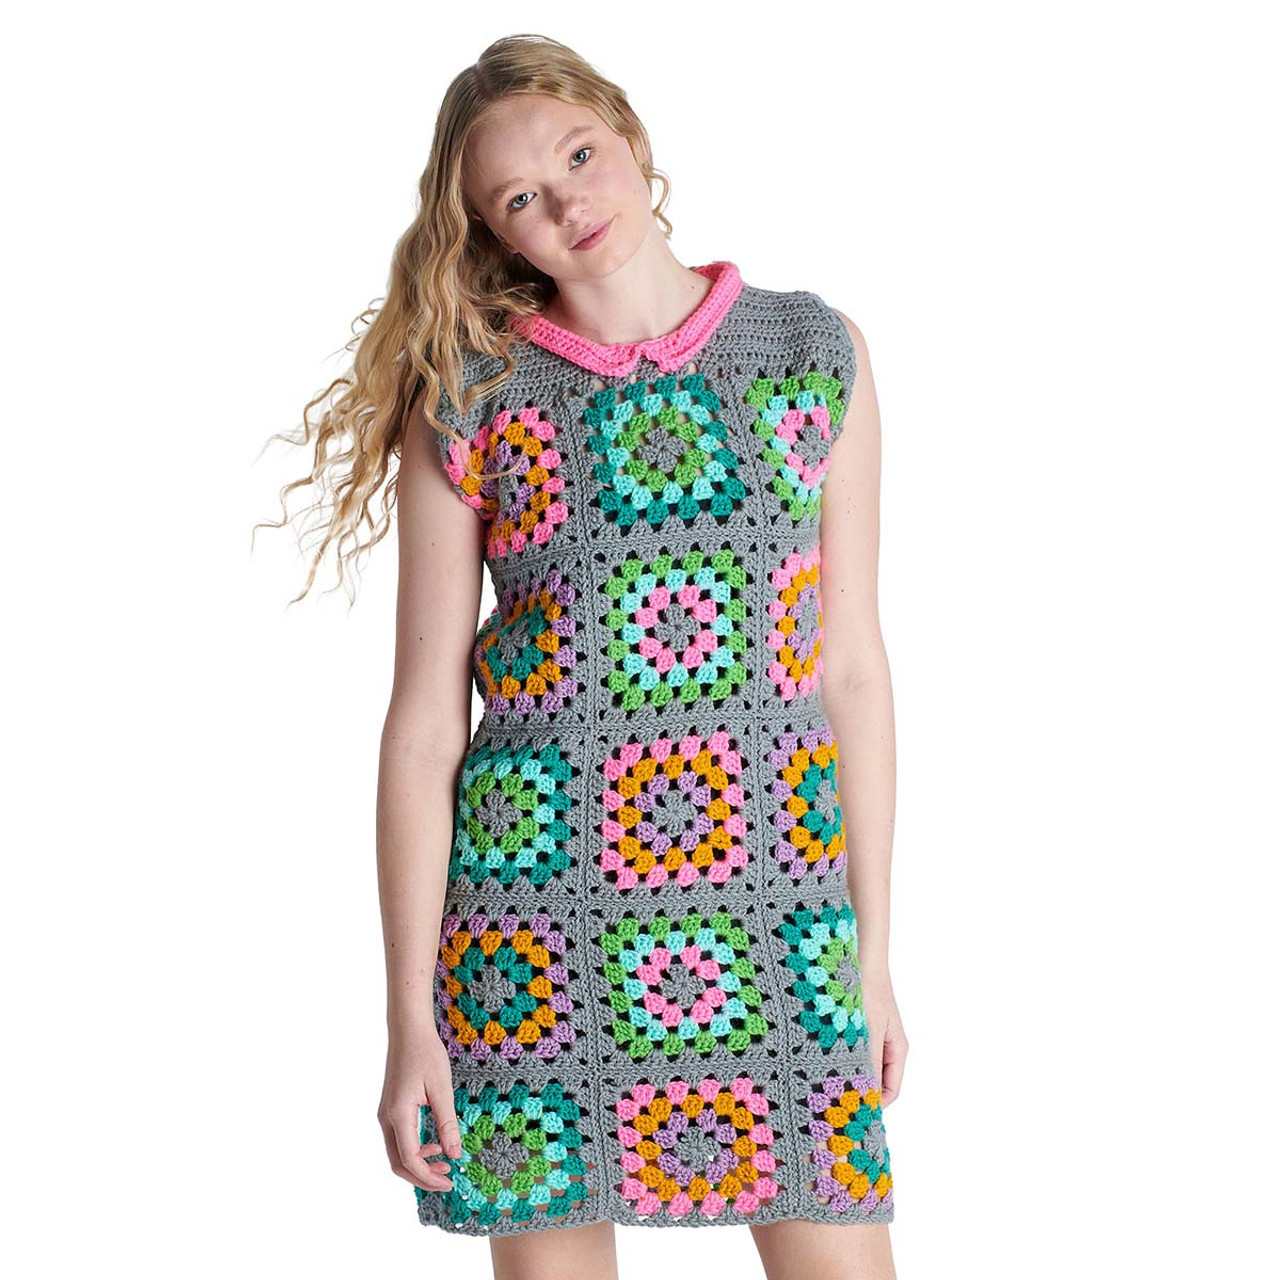 Red Heart Granny Square Crochet Dress Pattern Free Download